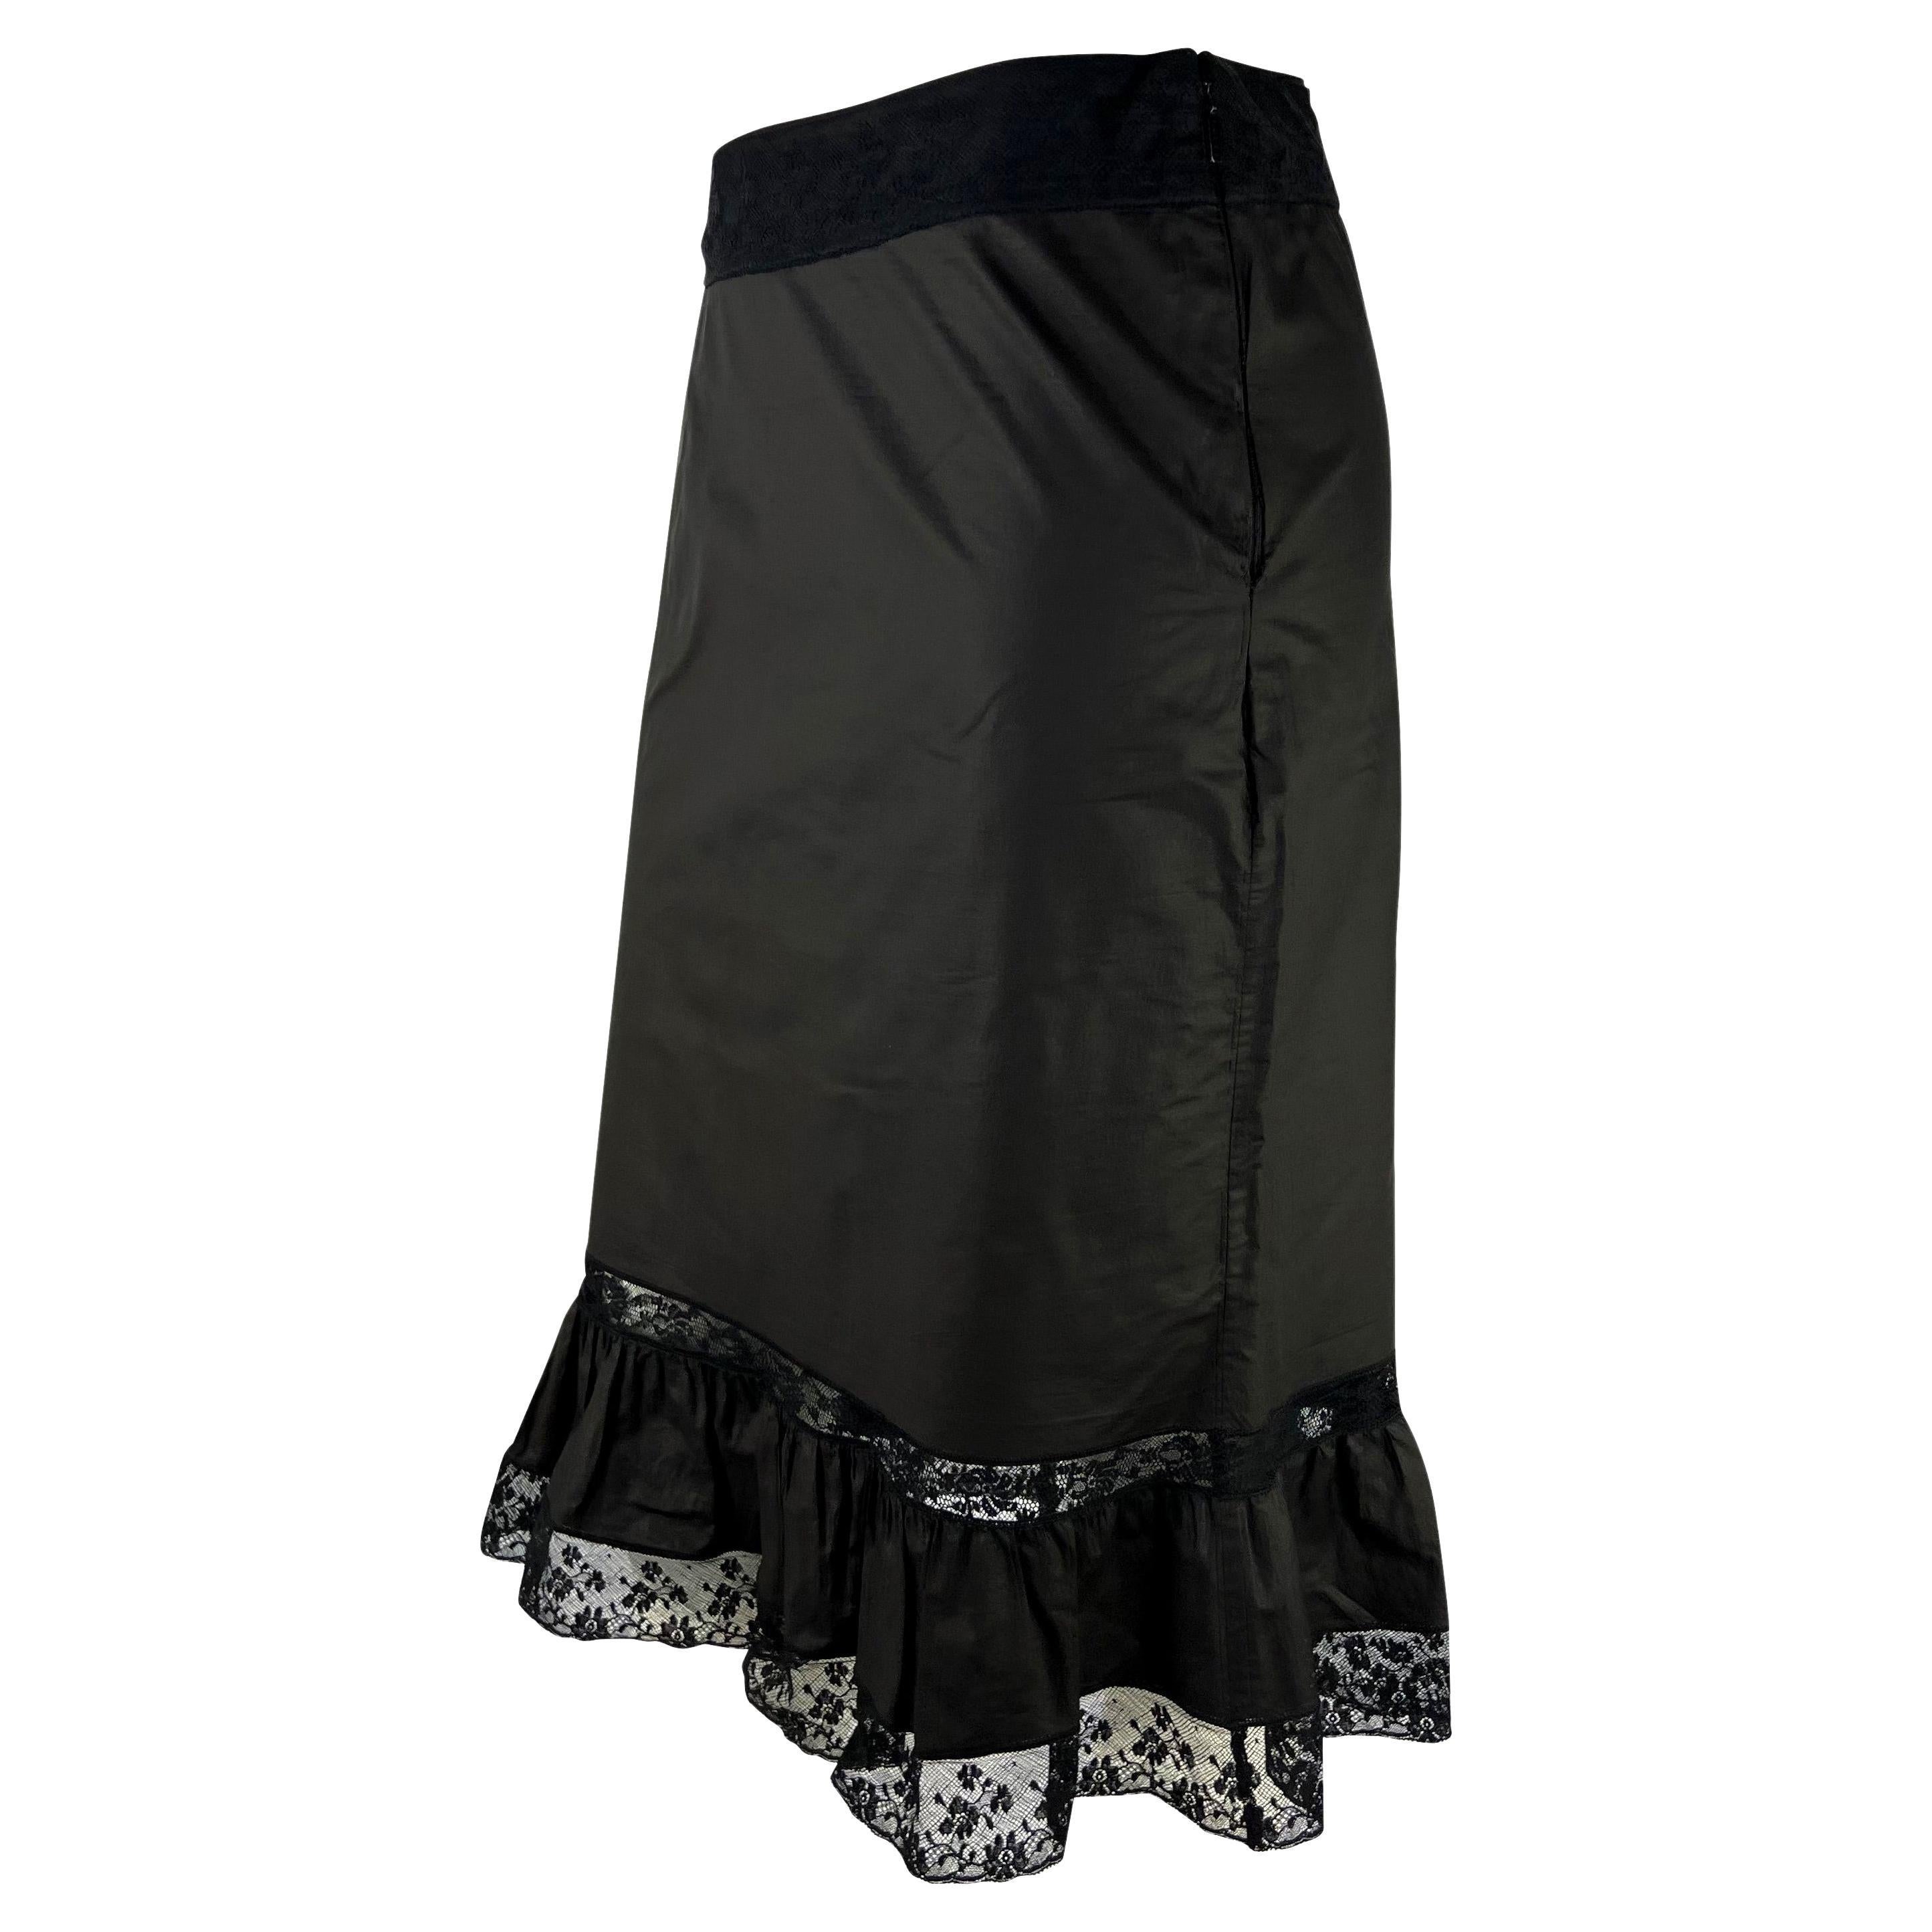 Presenting a black lace ruffle trim Gucci skirt, designed by Tom Ford. From the Spring/Summer 2002 collection, this lightweight skirt features a ruffle hem with lace details. 

Approximate measurements:
Size - IT42
31